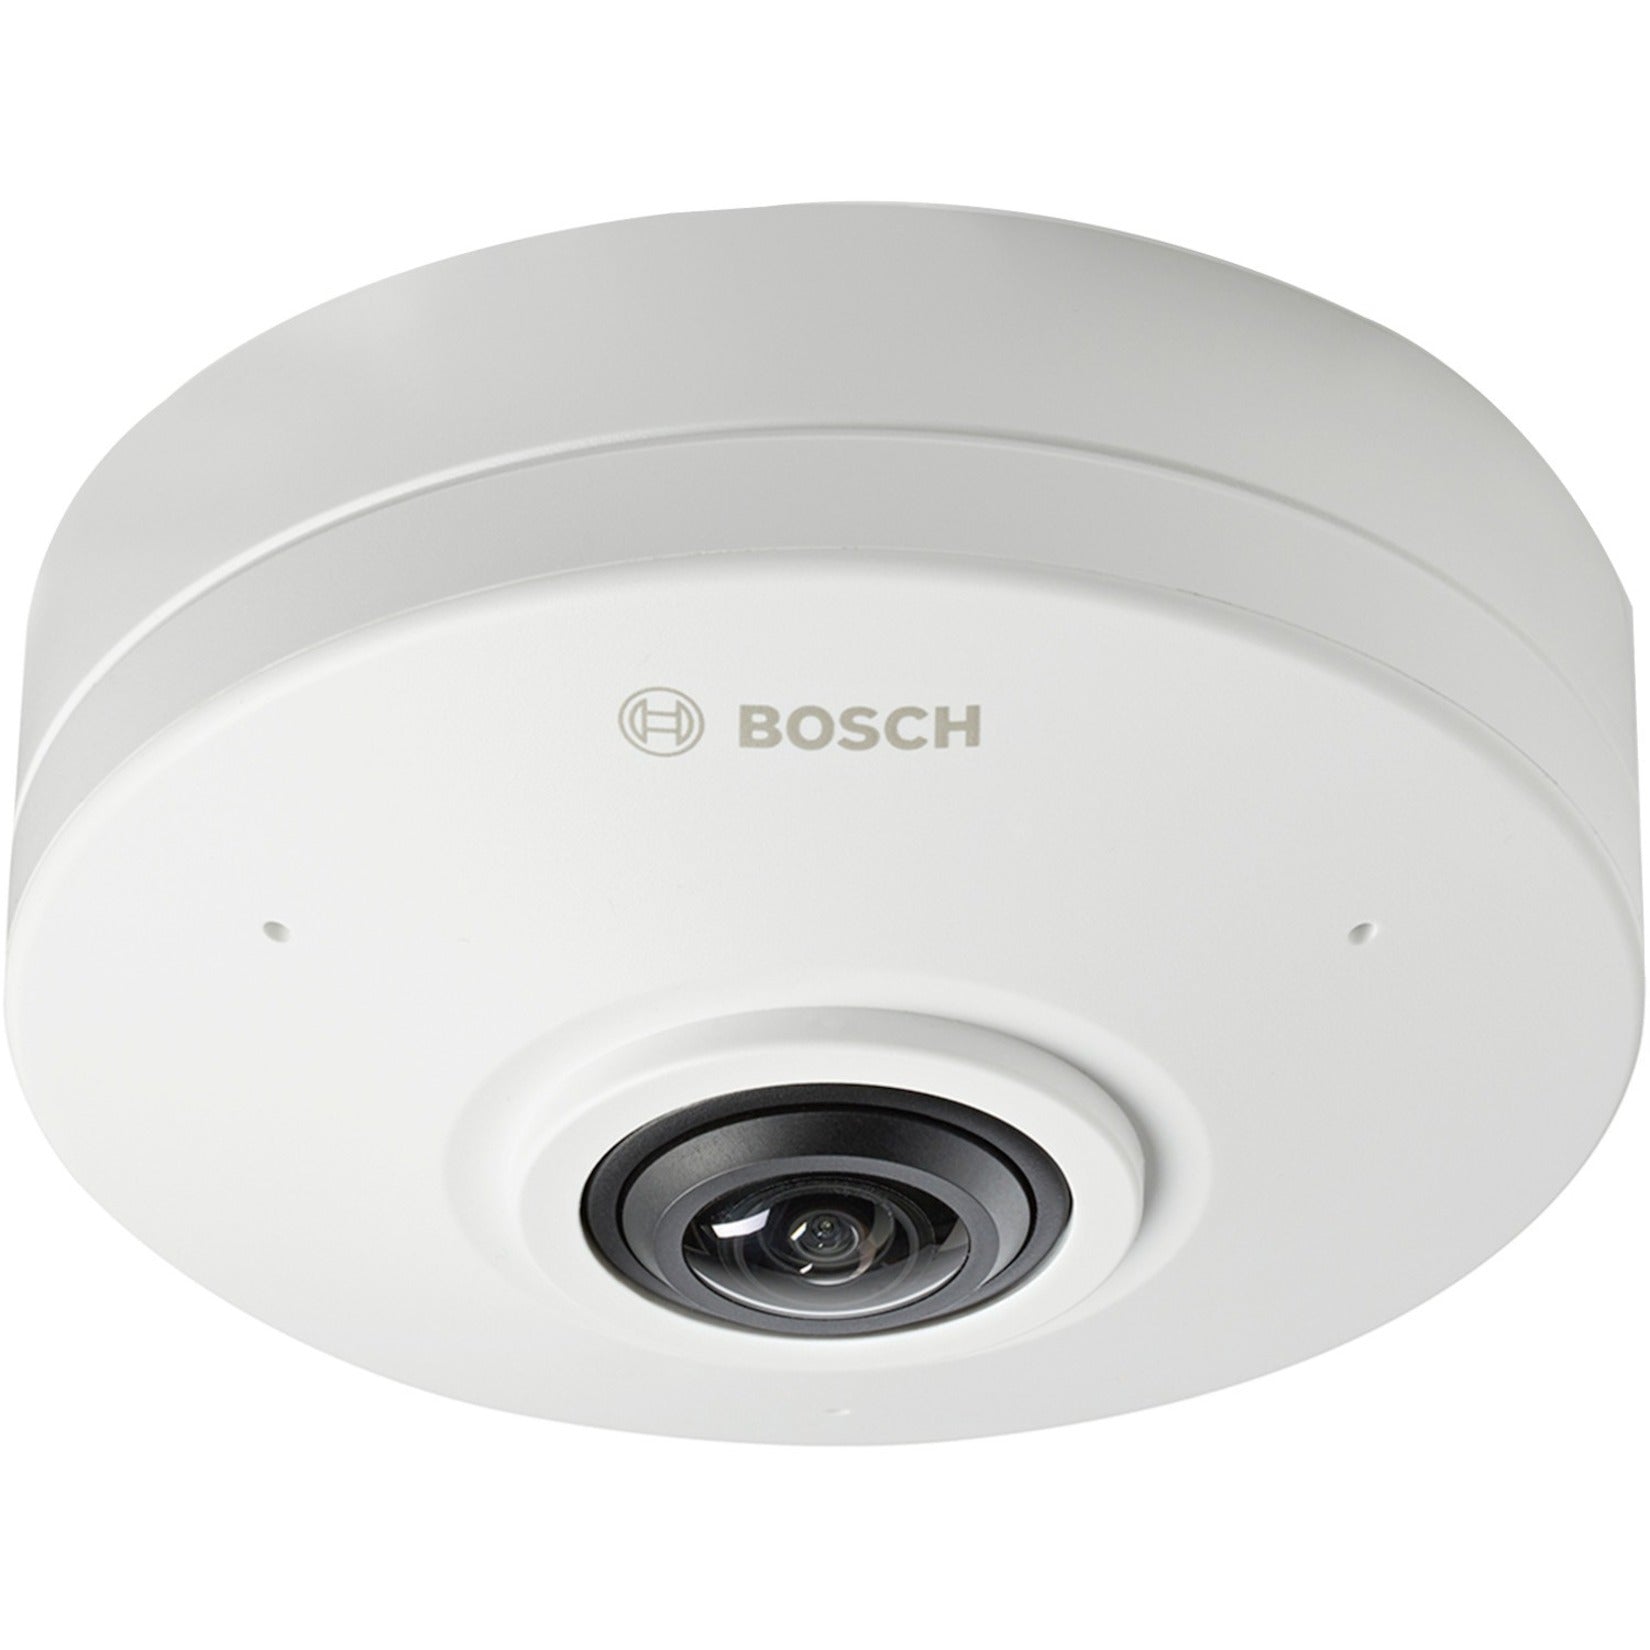 Bosch 12MP 360 Panoramic Camera with Stereographic Lens [Discontinued]